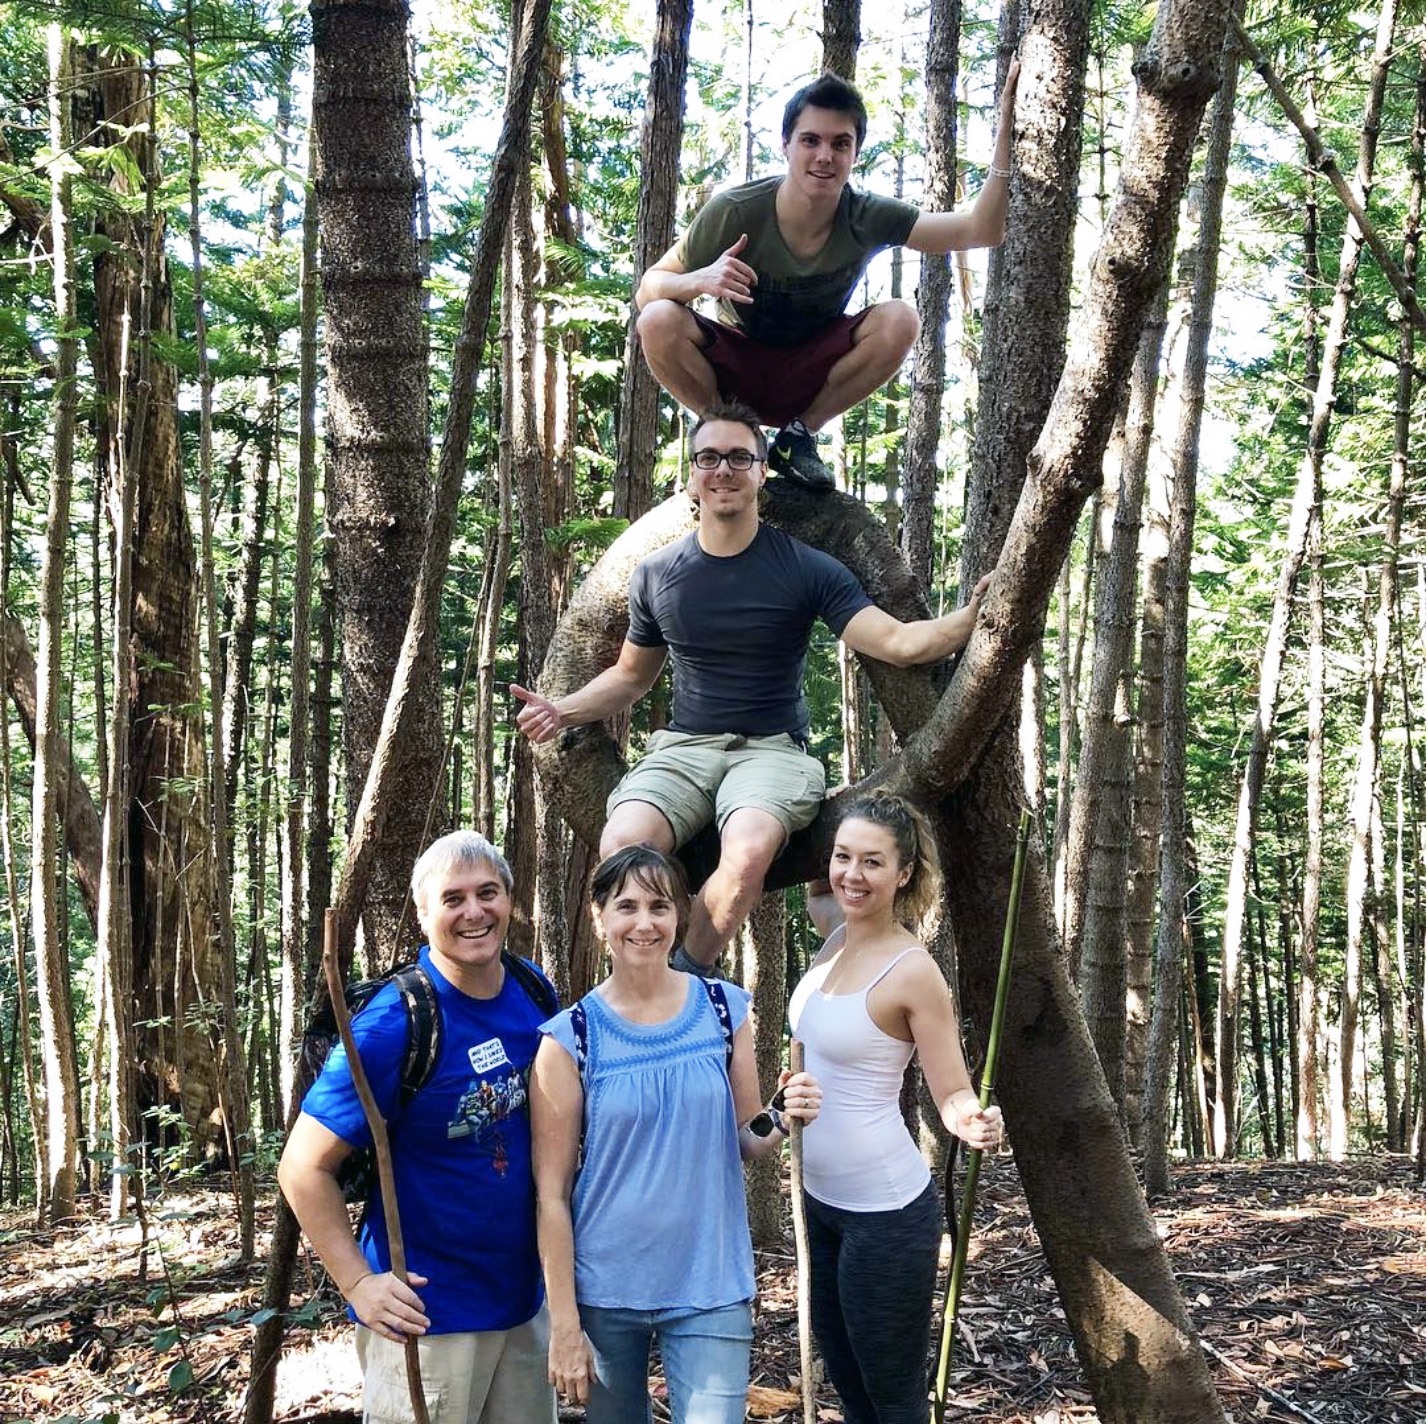 Hiking ‘Aiea Loop Trail in Hawai‘i with his brother, his brother’s wife, and his parents.